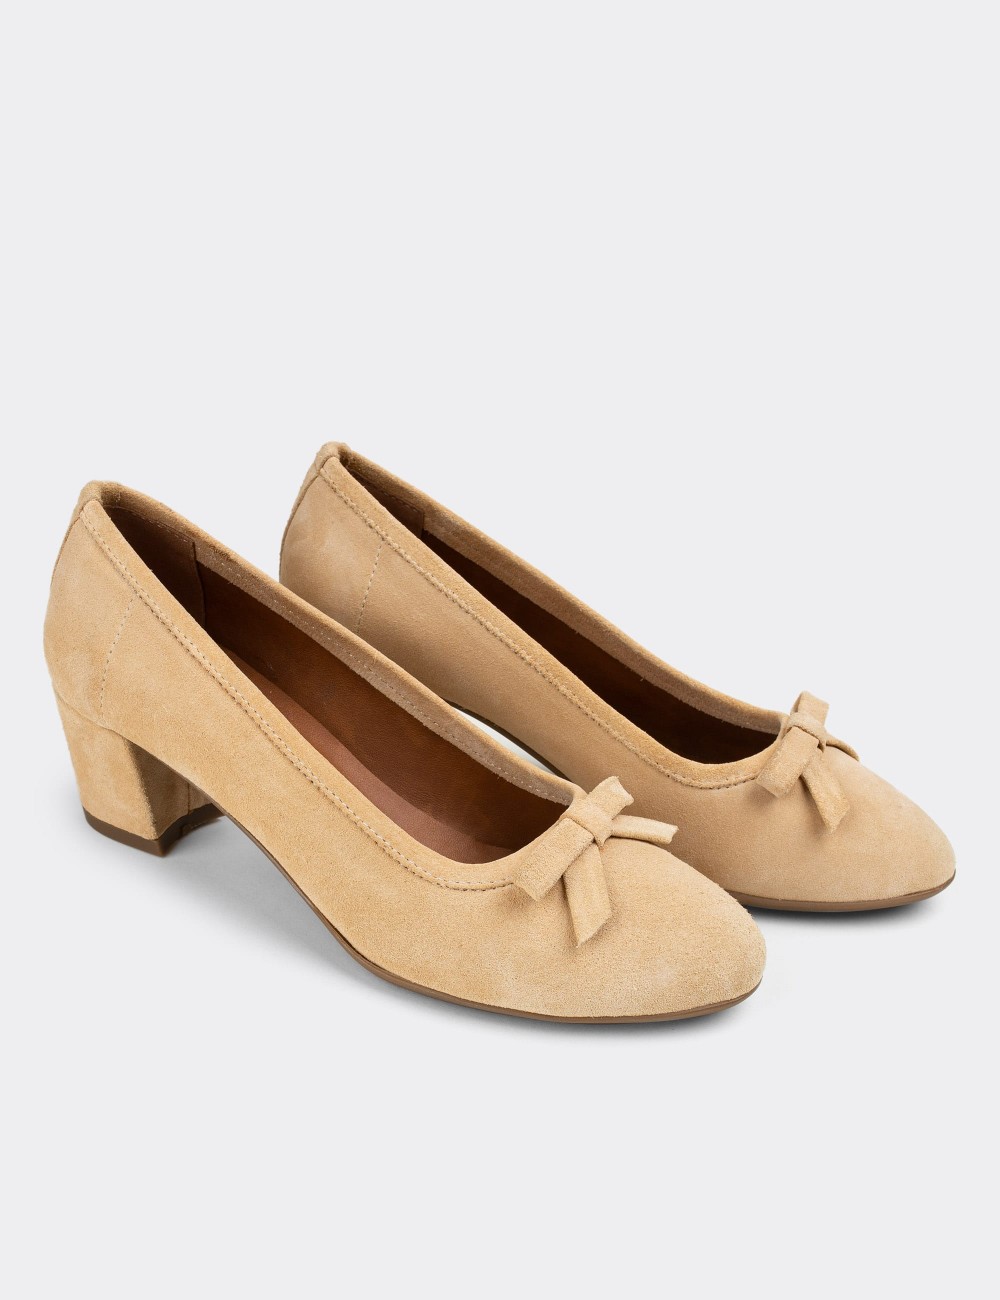 Beige Suede Leather Lace-up Shoes - E1471ZBEJC02